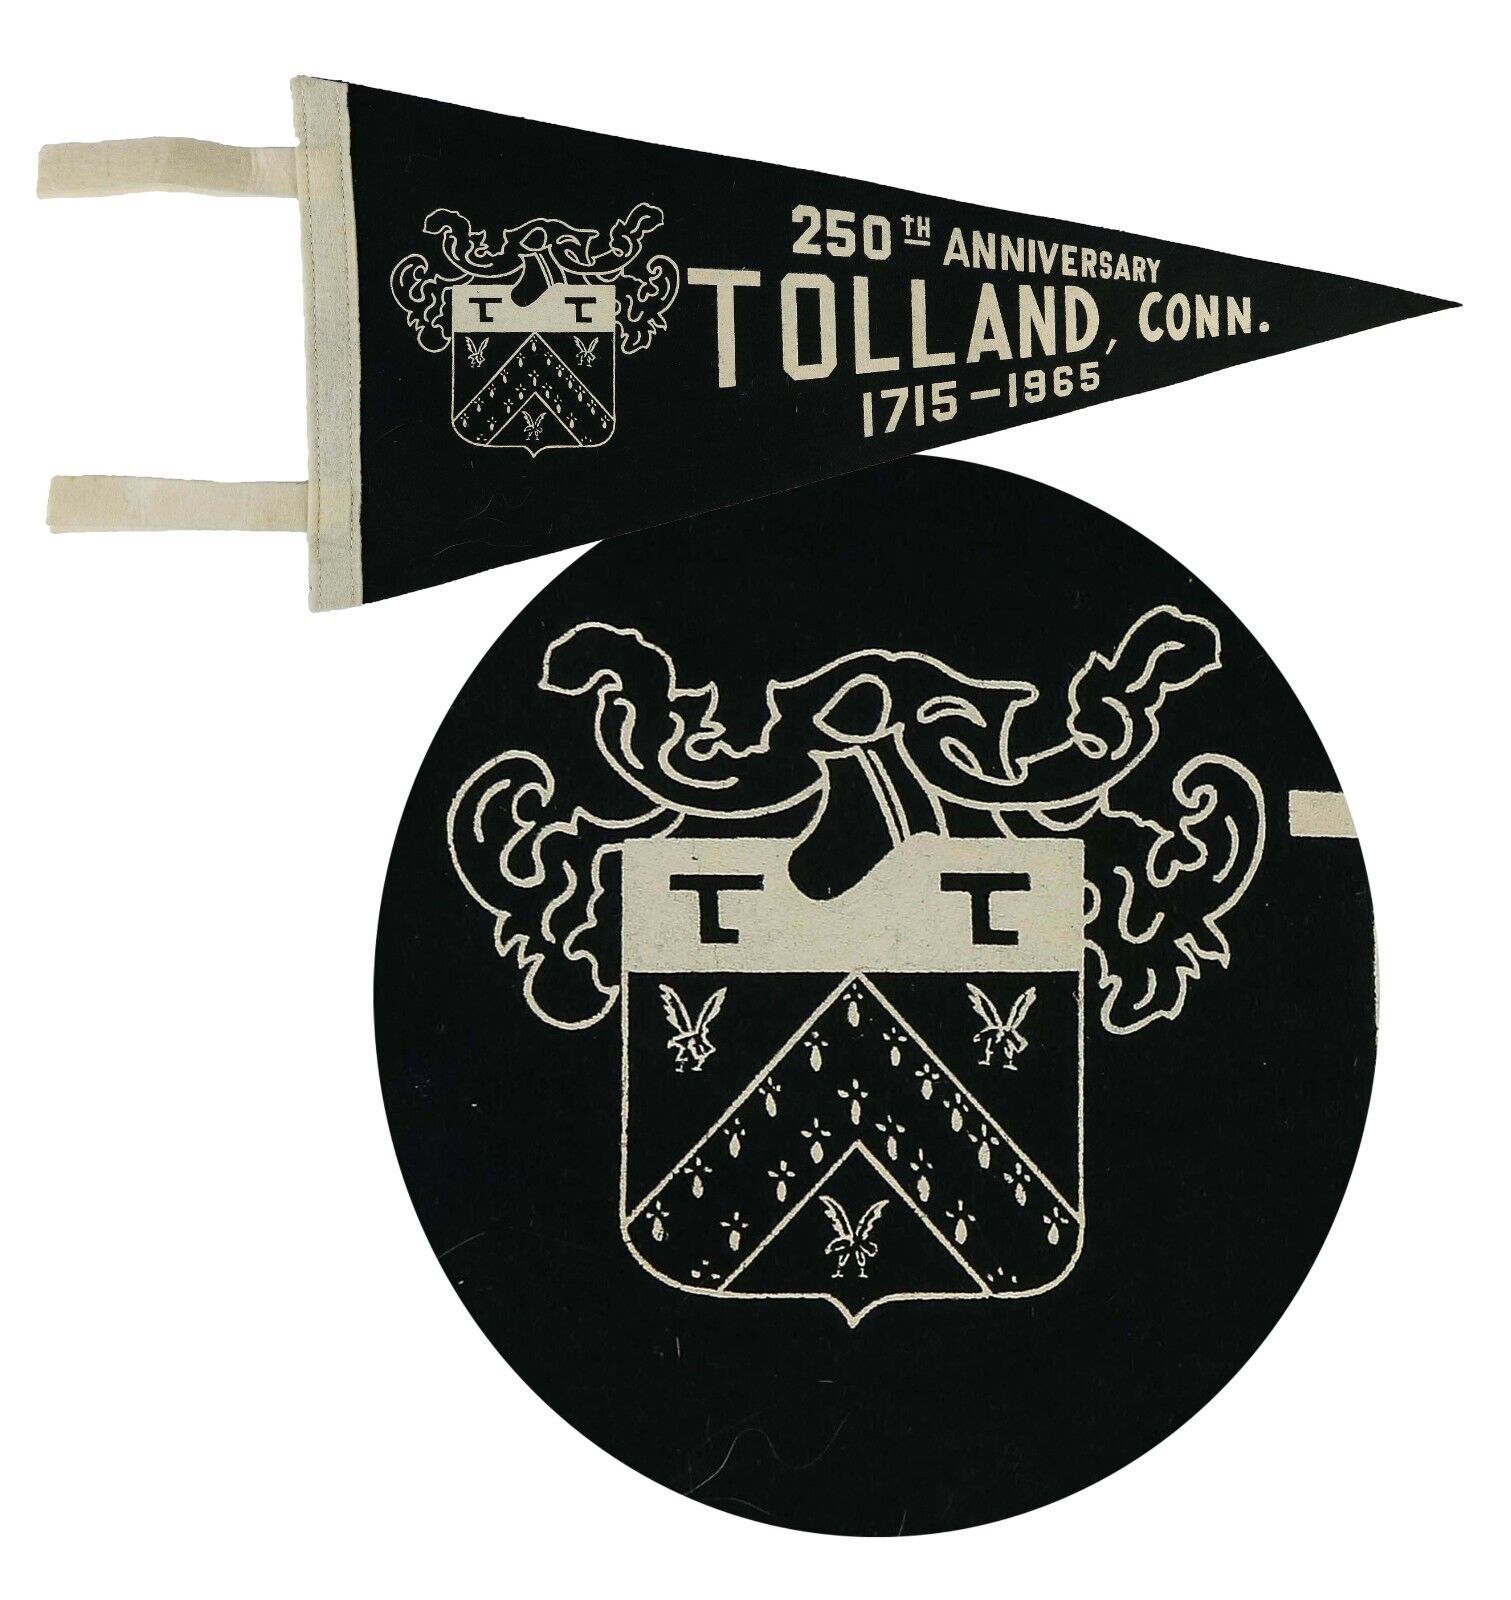 ⭐TOLLAND, CONN 250th Anniversary 1715-1965 Vintage Commemorative Green Pennant👀